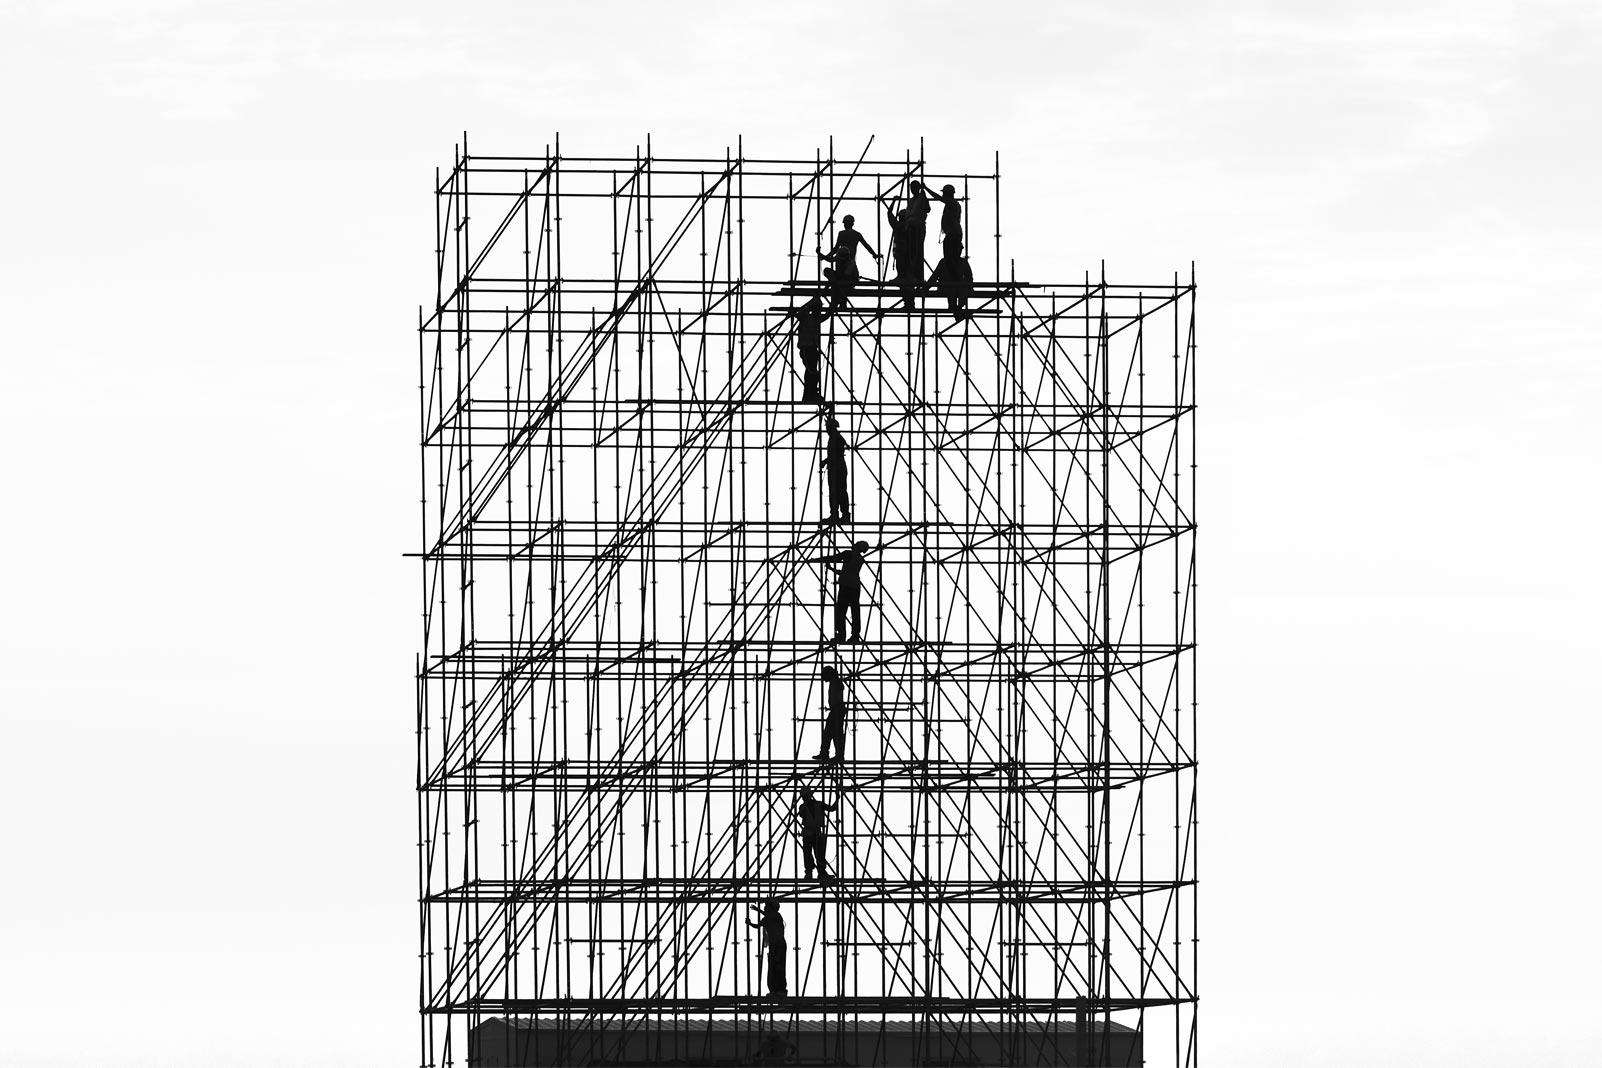 Construction crew assembling scaffold structure